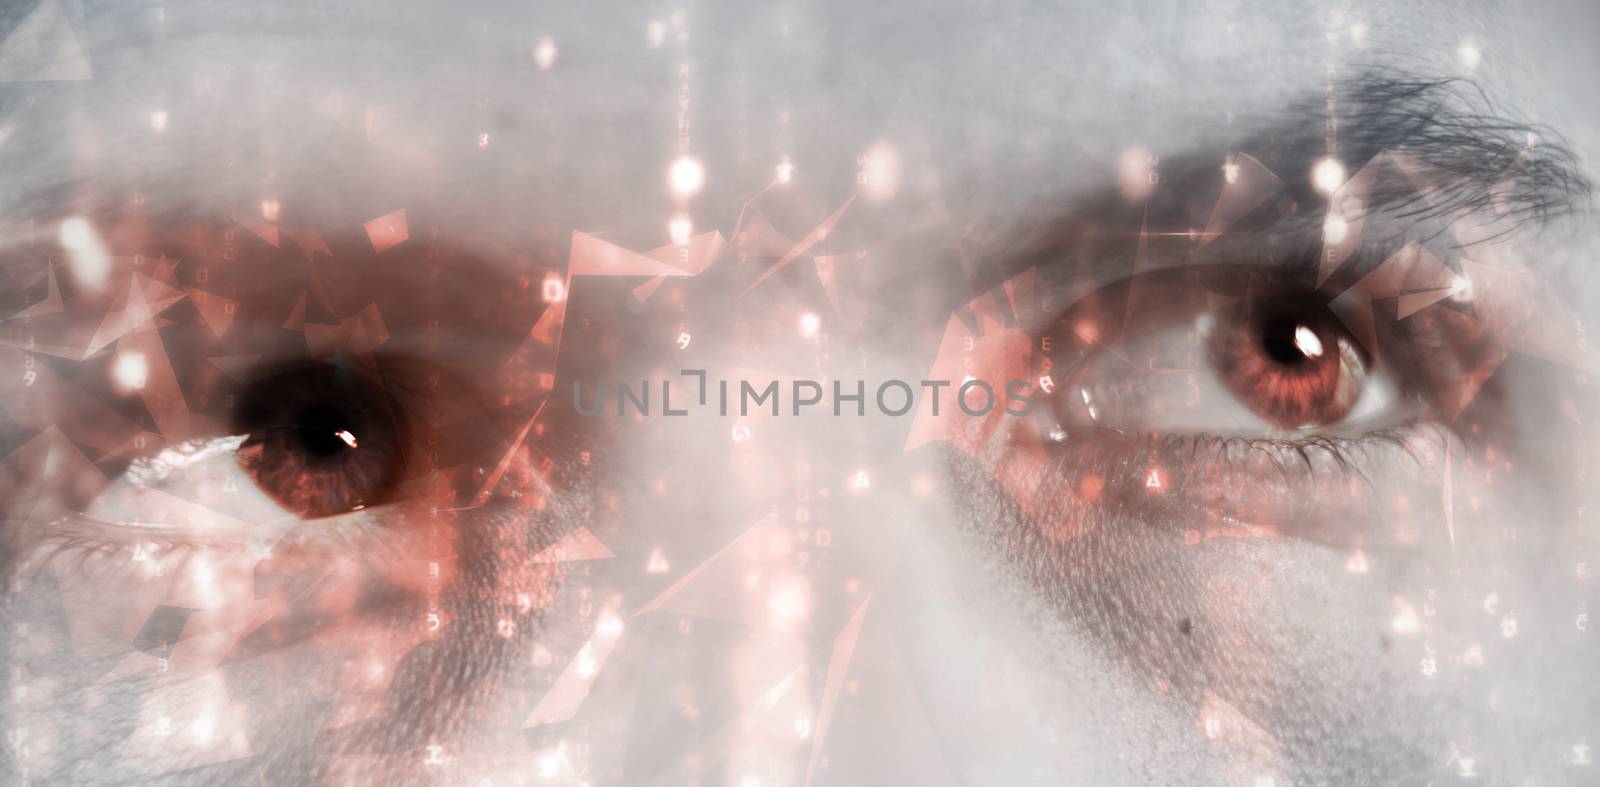 Composite image of abstract background by Wavebreakmedia